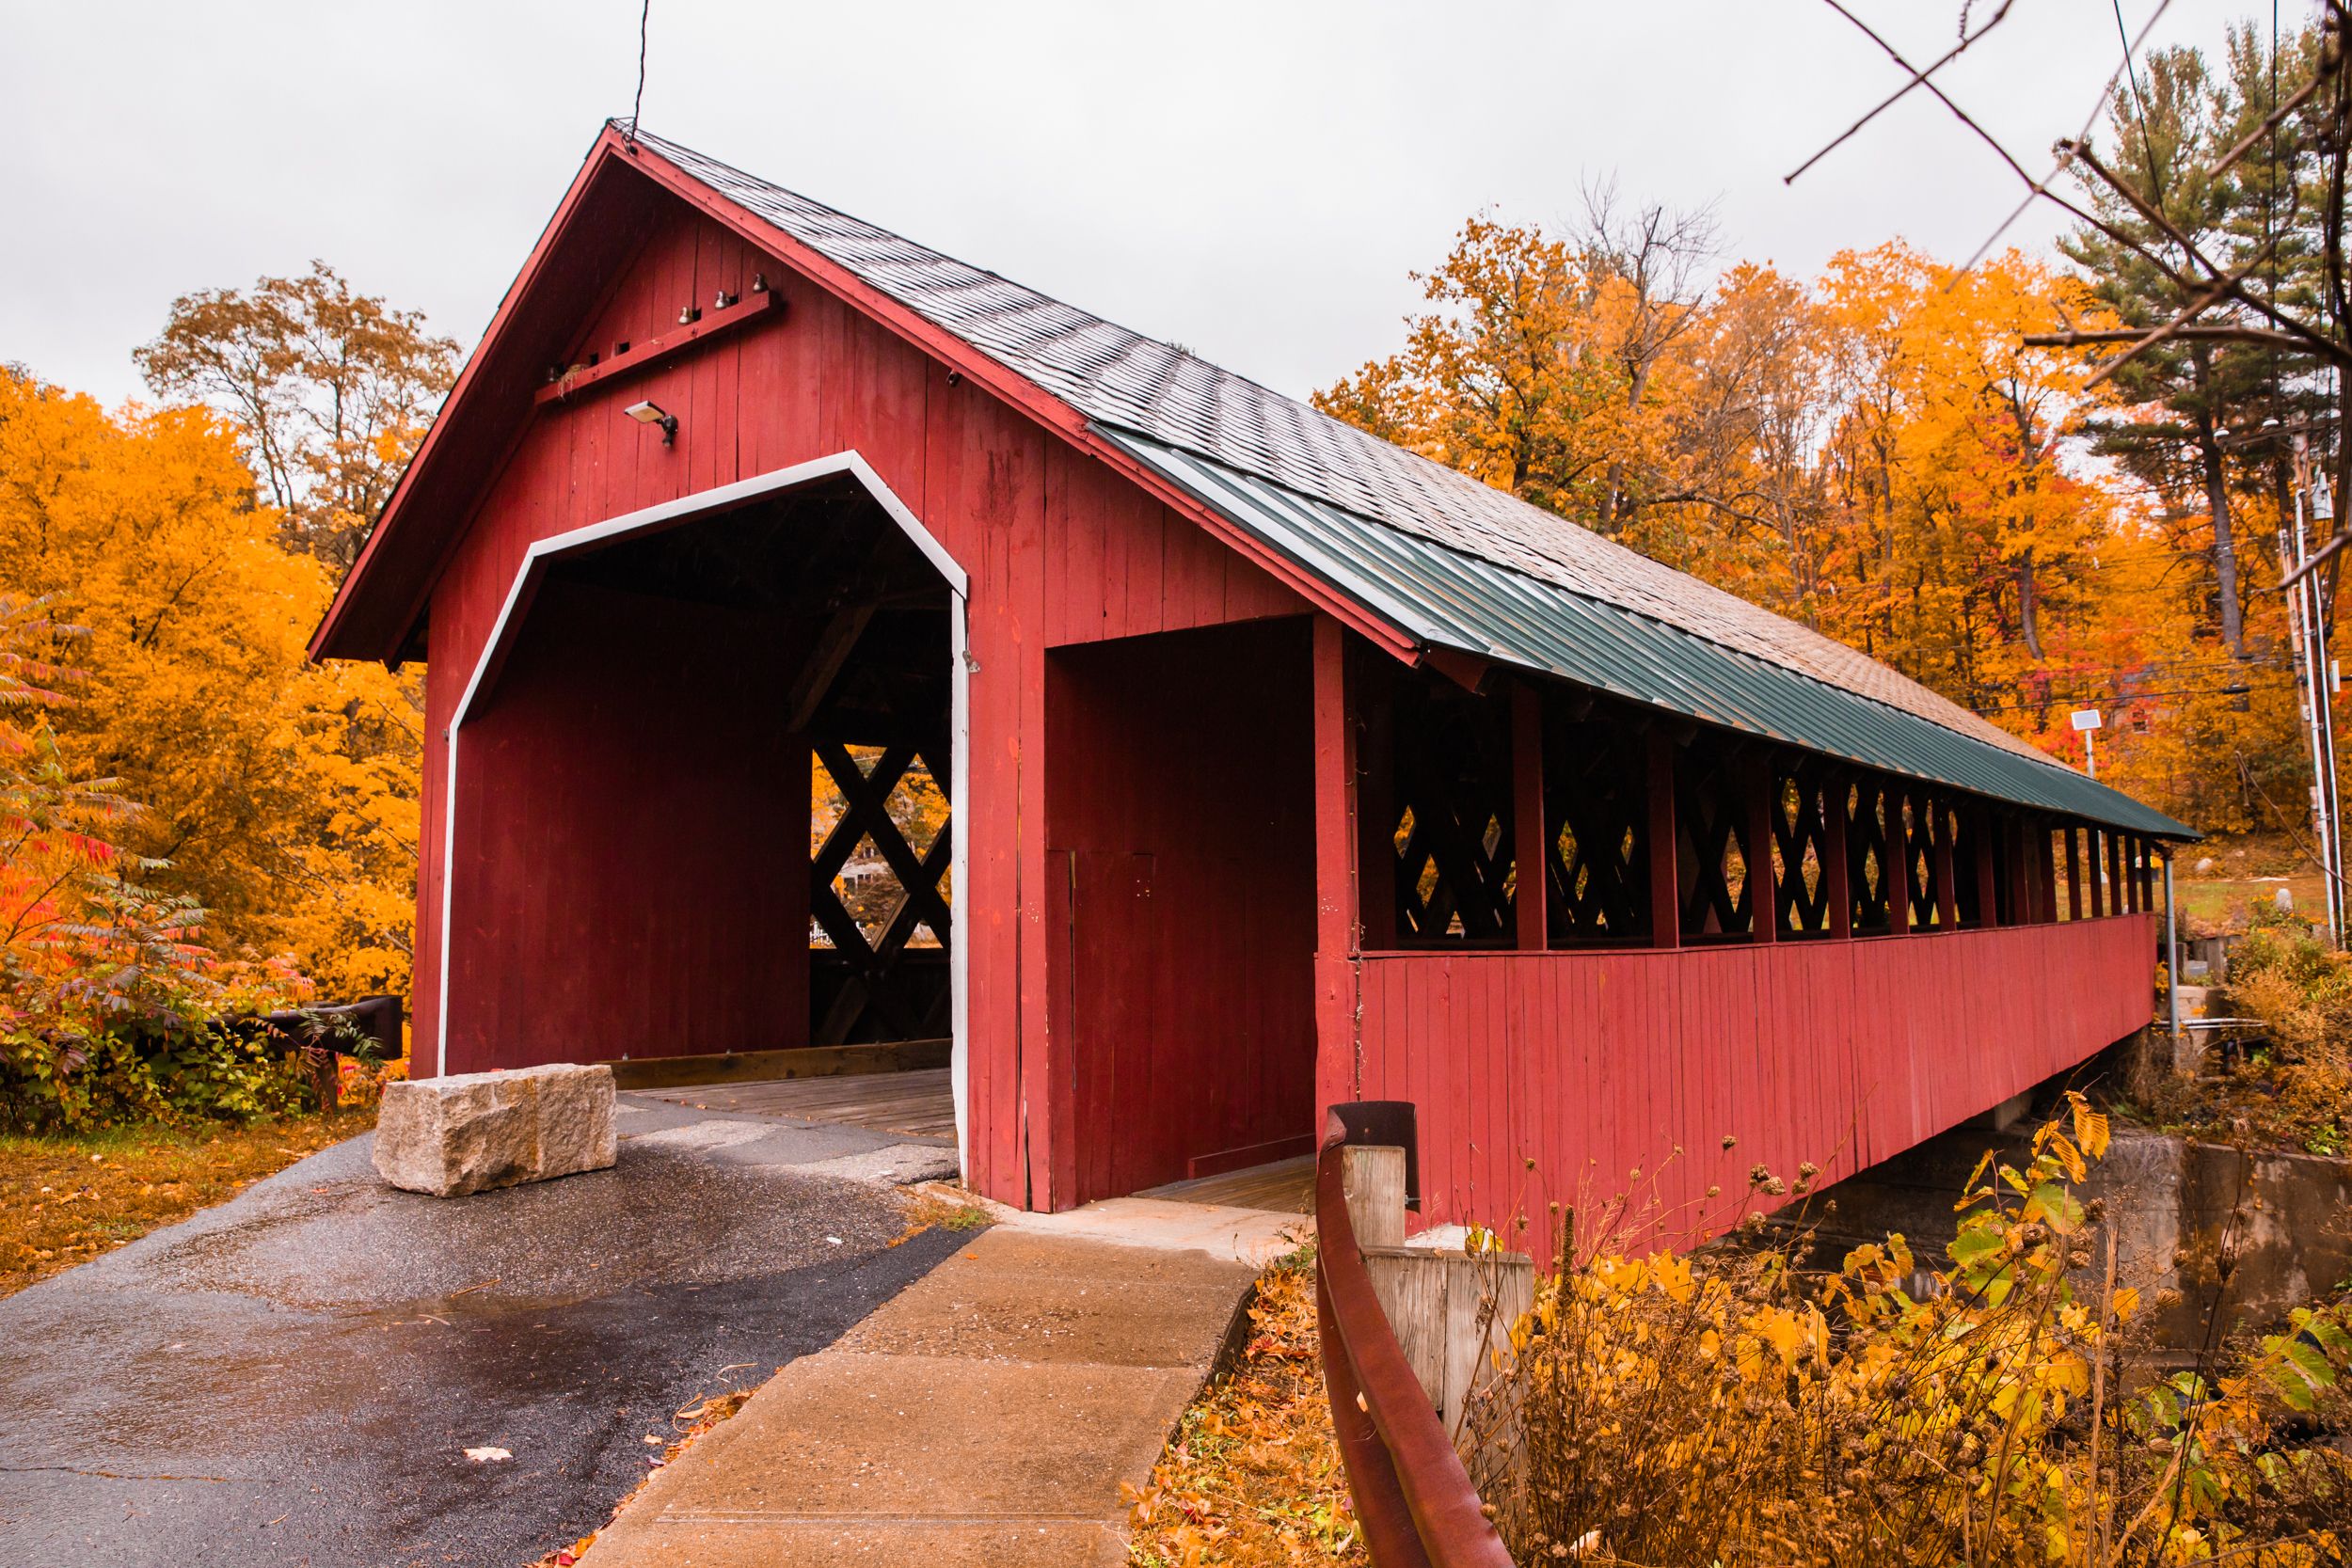 The bright red Creamery Covered Bridge at the Living Memorial Park in Brattleboro, Vermont